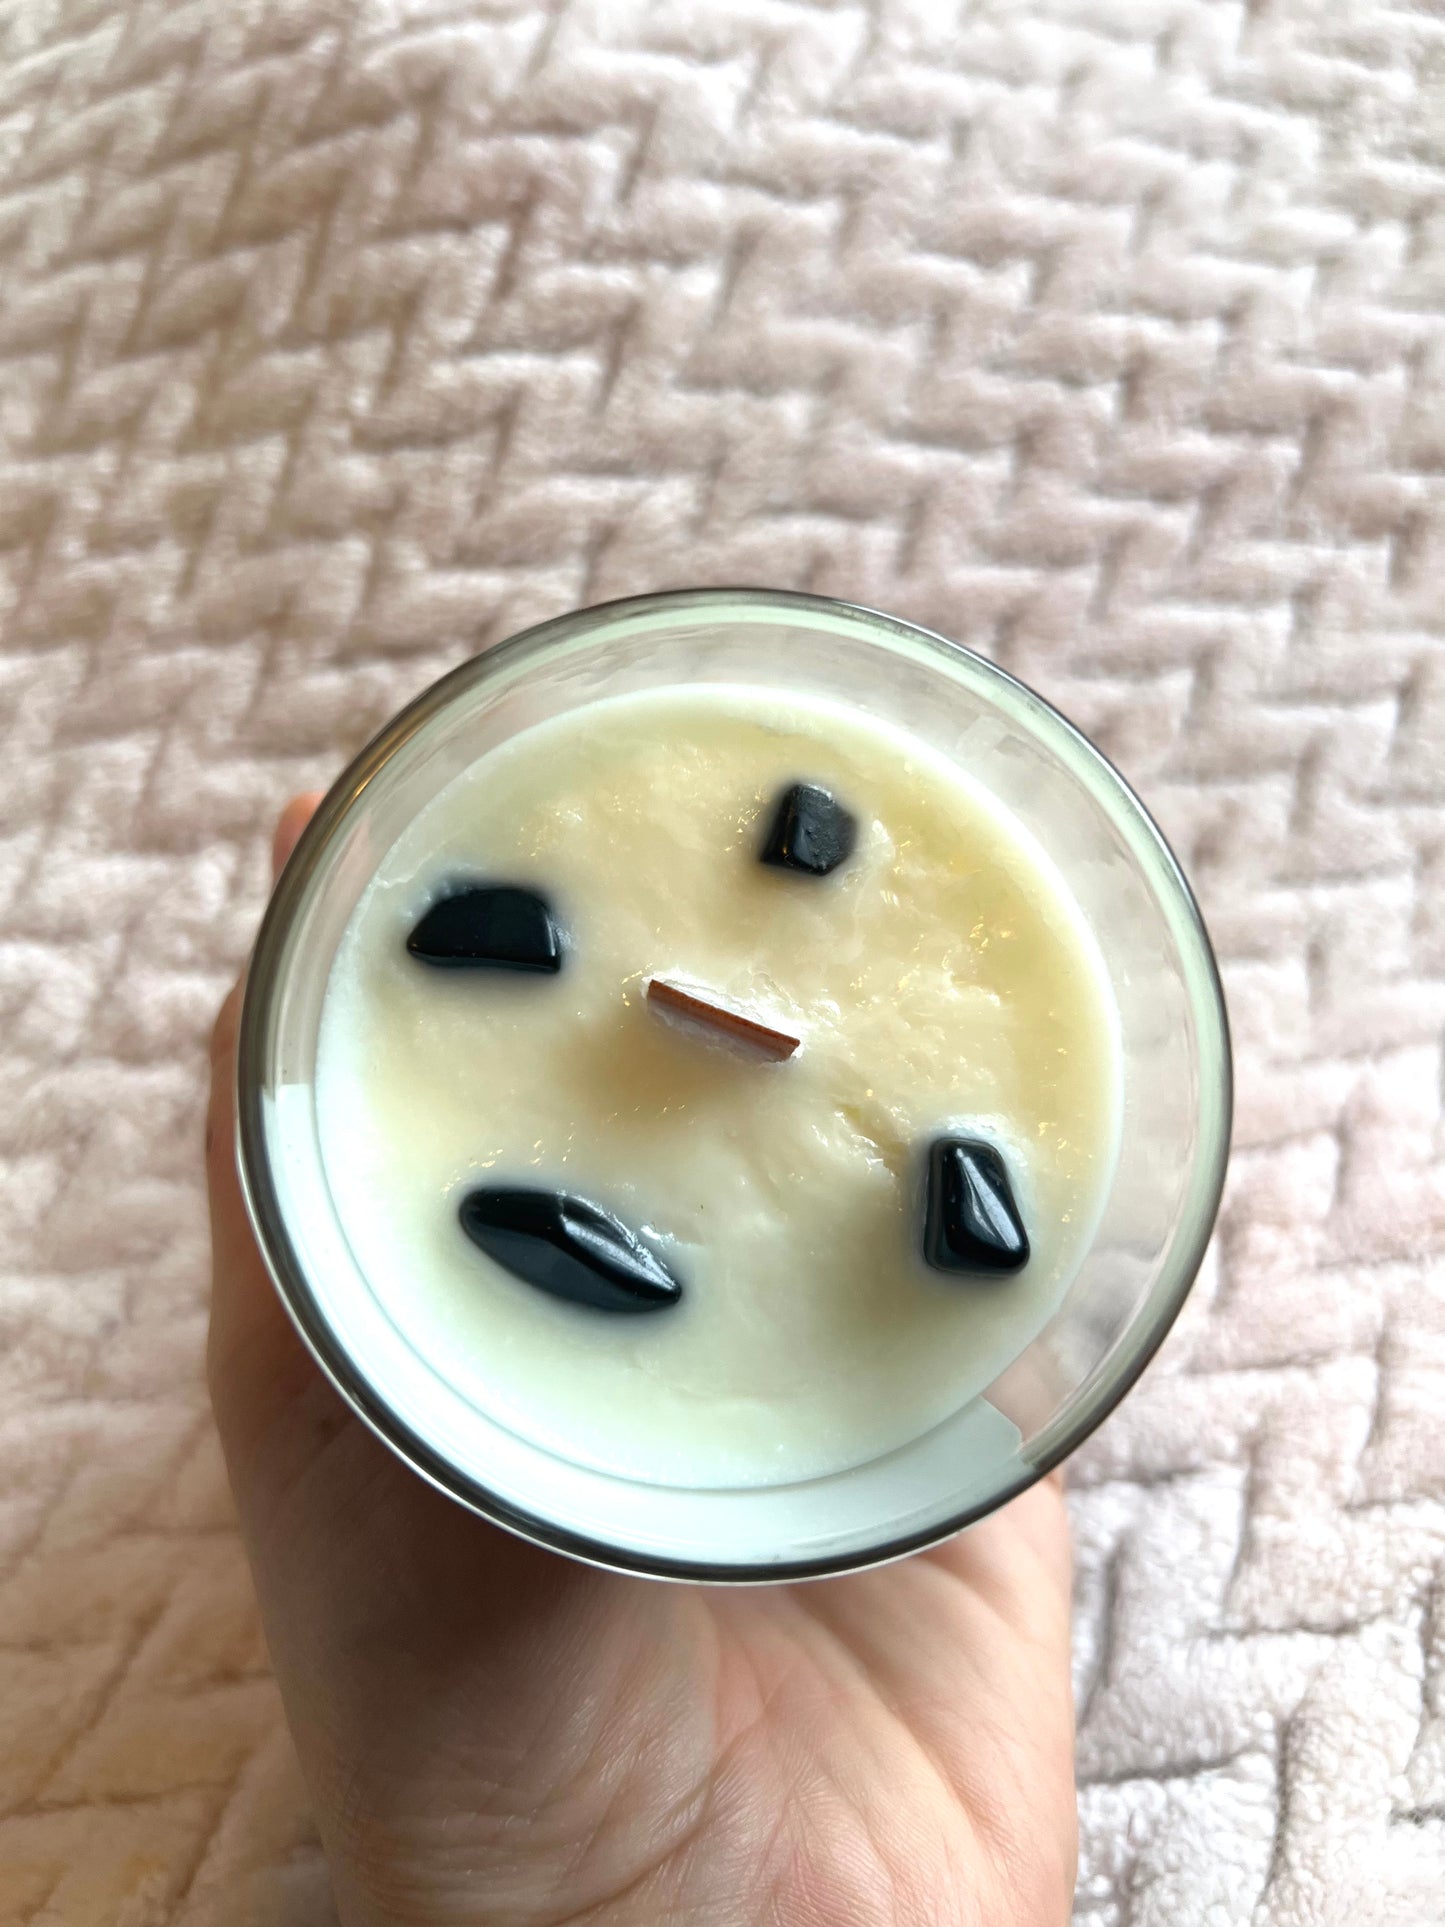 candle with black obsidian crystal, new moon, moon phases candles, patchouli and sandalwood